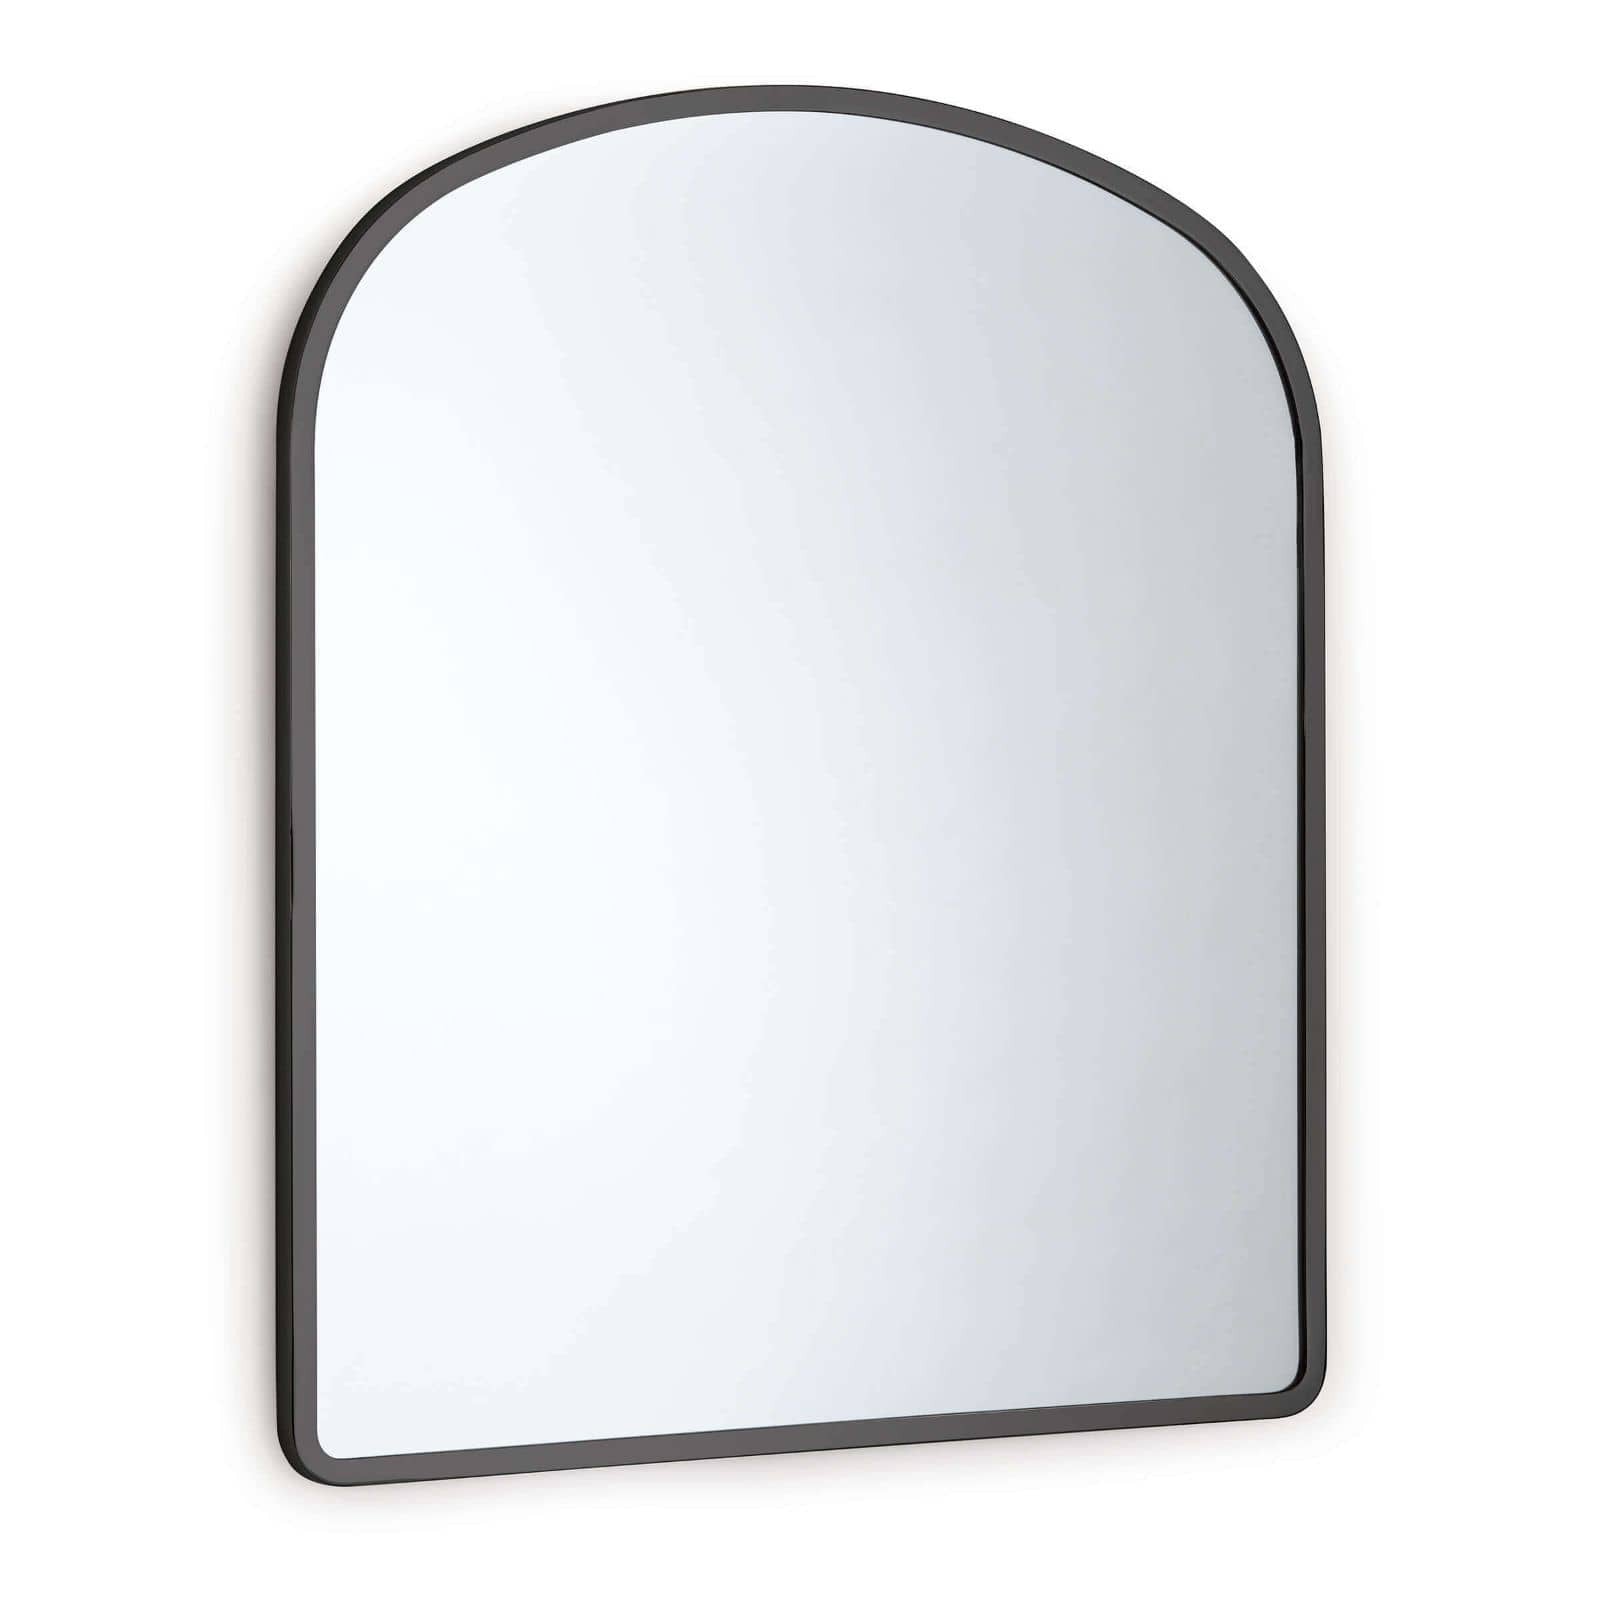 We love the arched metal frame of this Cloak Mirror. Place in your entryway, living room, or bedroom and bring a sleek, sophisticated look to the space!   Overall Size: 26"w x 0.75"d x 30"h